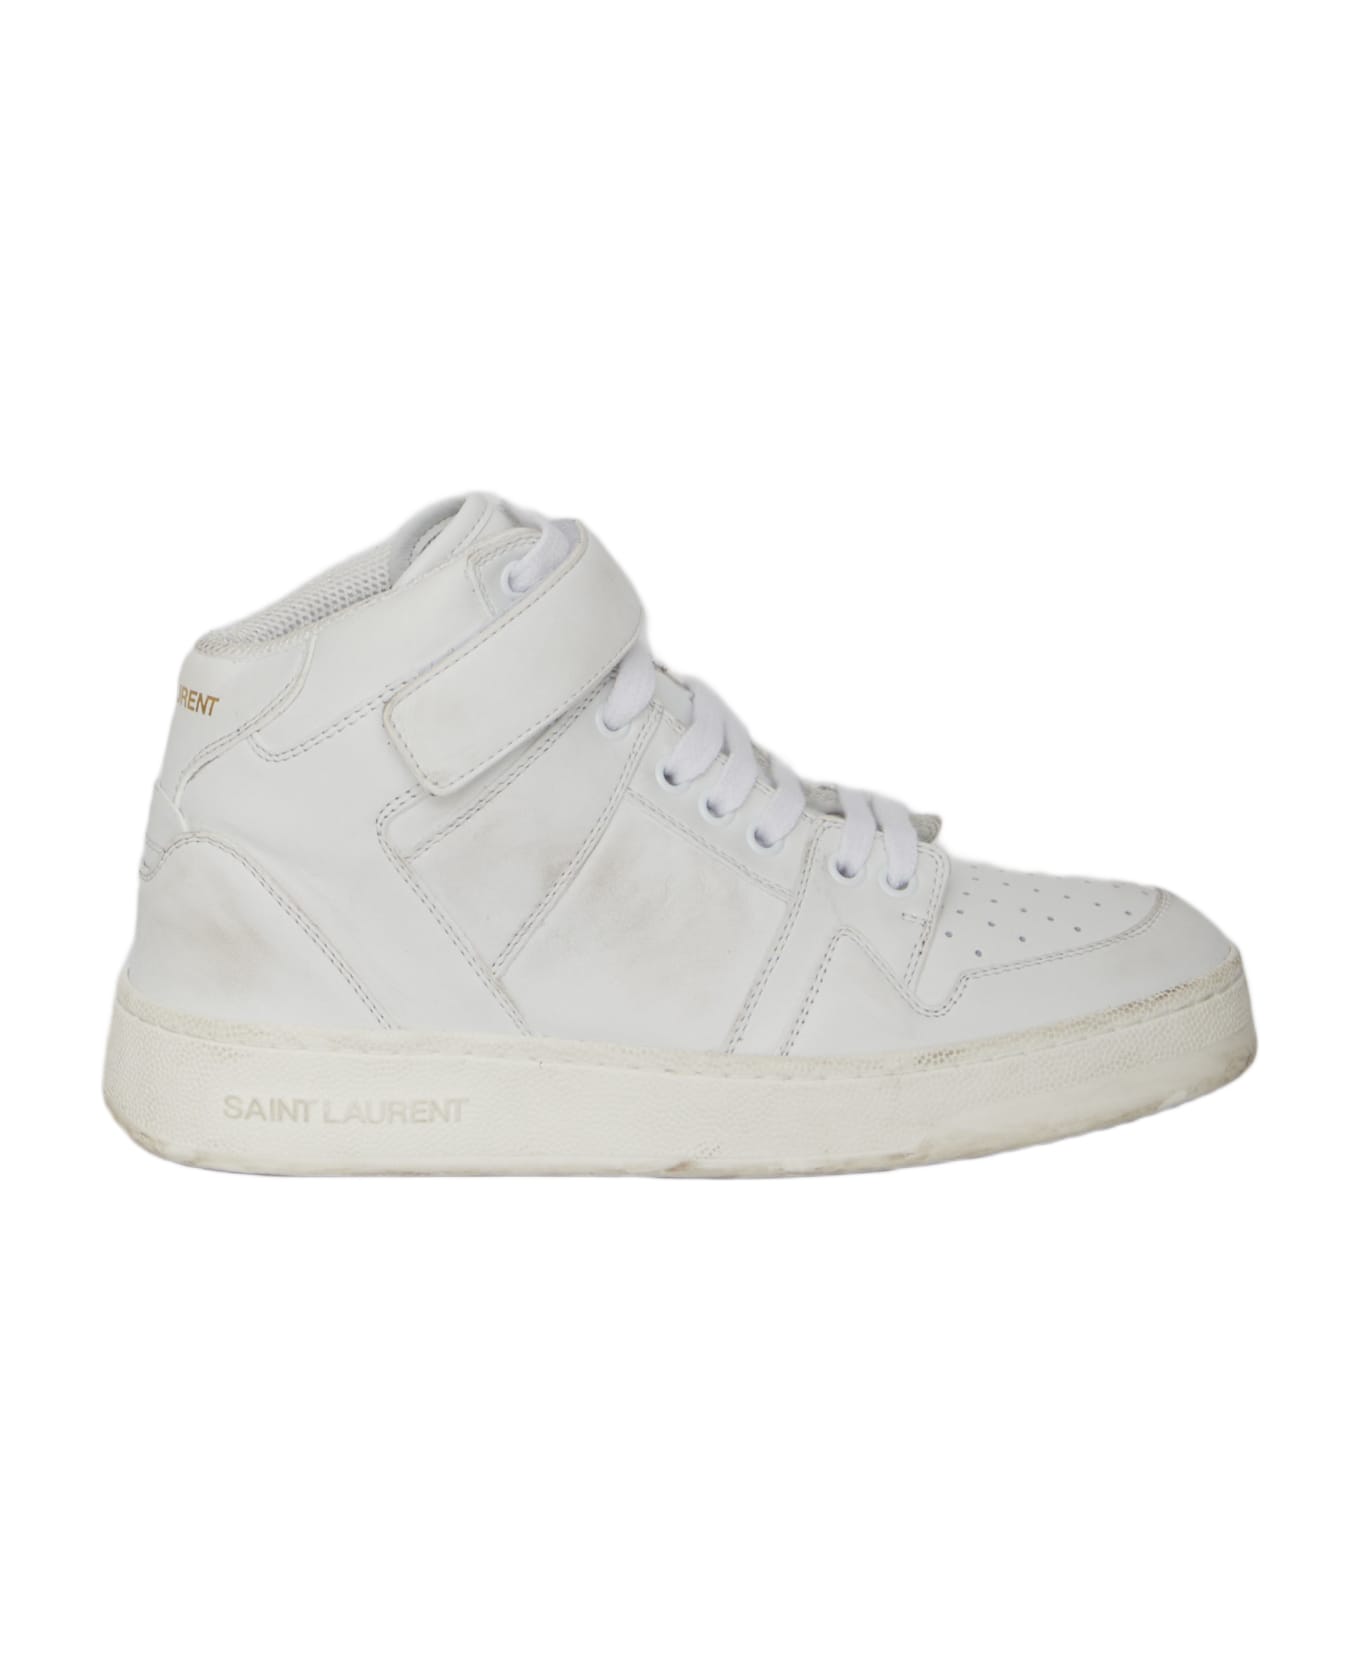 Saint Laurent Lax Sneakers In Washed-out Effect Leather - WHITE スニーカー